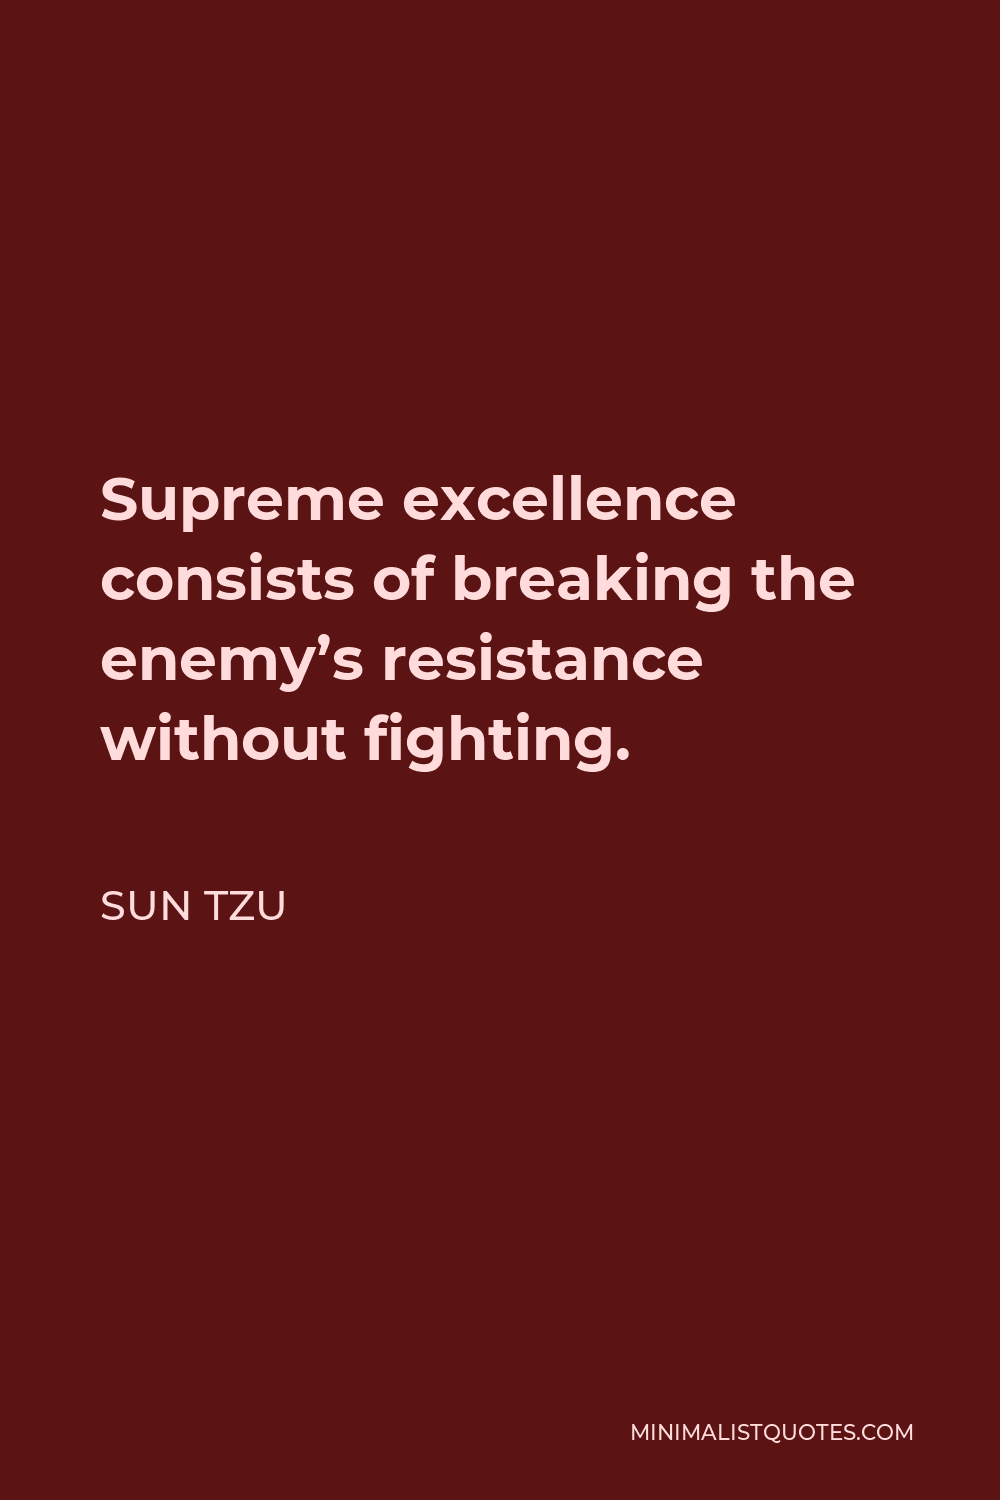 Sun Tzu Quote - Supreme excellence consists of breaking the enemy’s resistance without fighting.